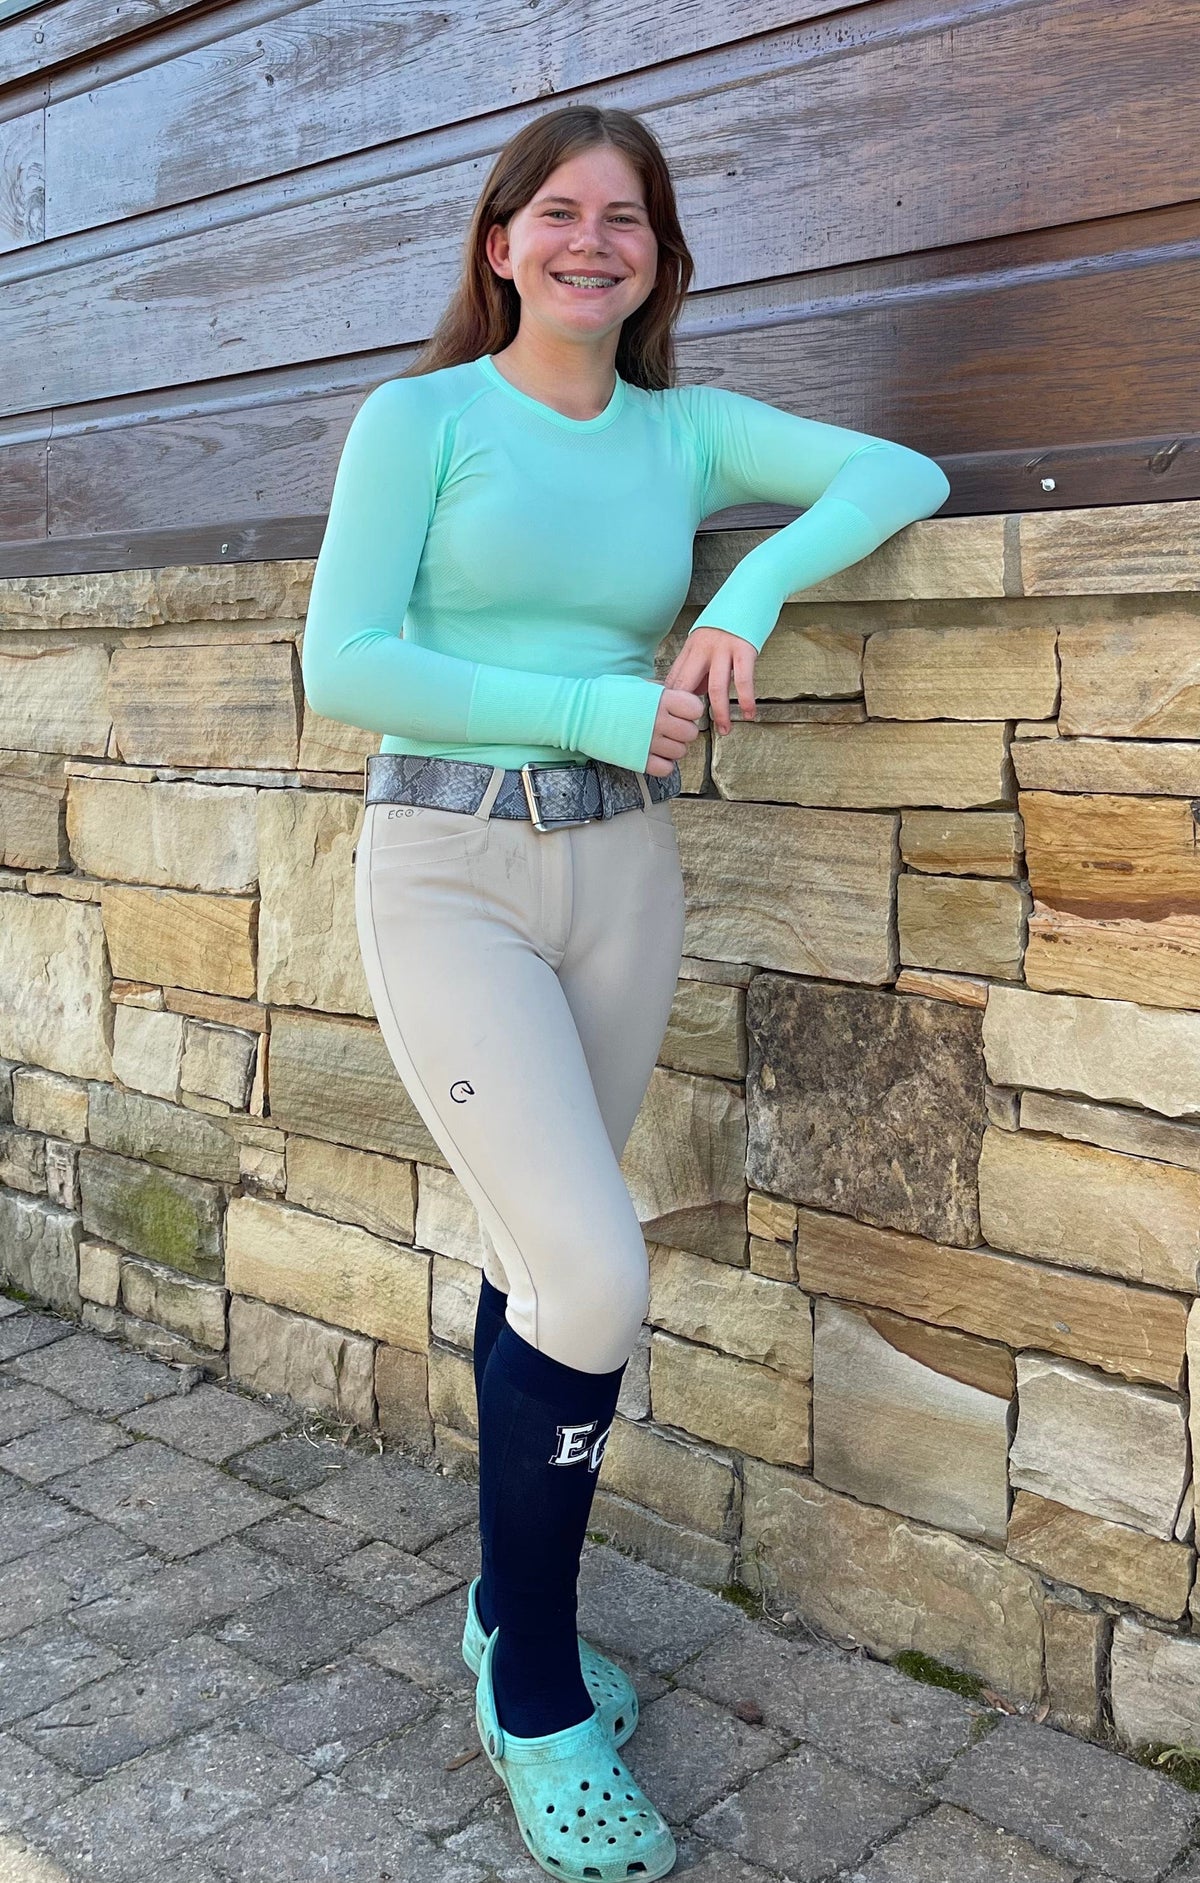 TKEQ Women's Casual Shirt TKEQ- Kennedy Seamless Long Sleeve Shirt Gloss equestrian team apparel online tack store mobile tack store custom farm apparel custom show stable clothing equestrian lifestyle horse show clothing riding clothes horses equestrian tack store